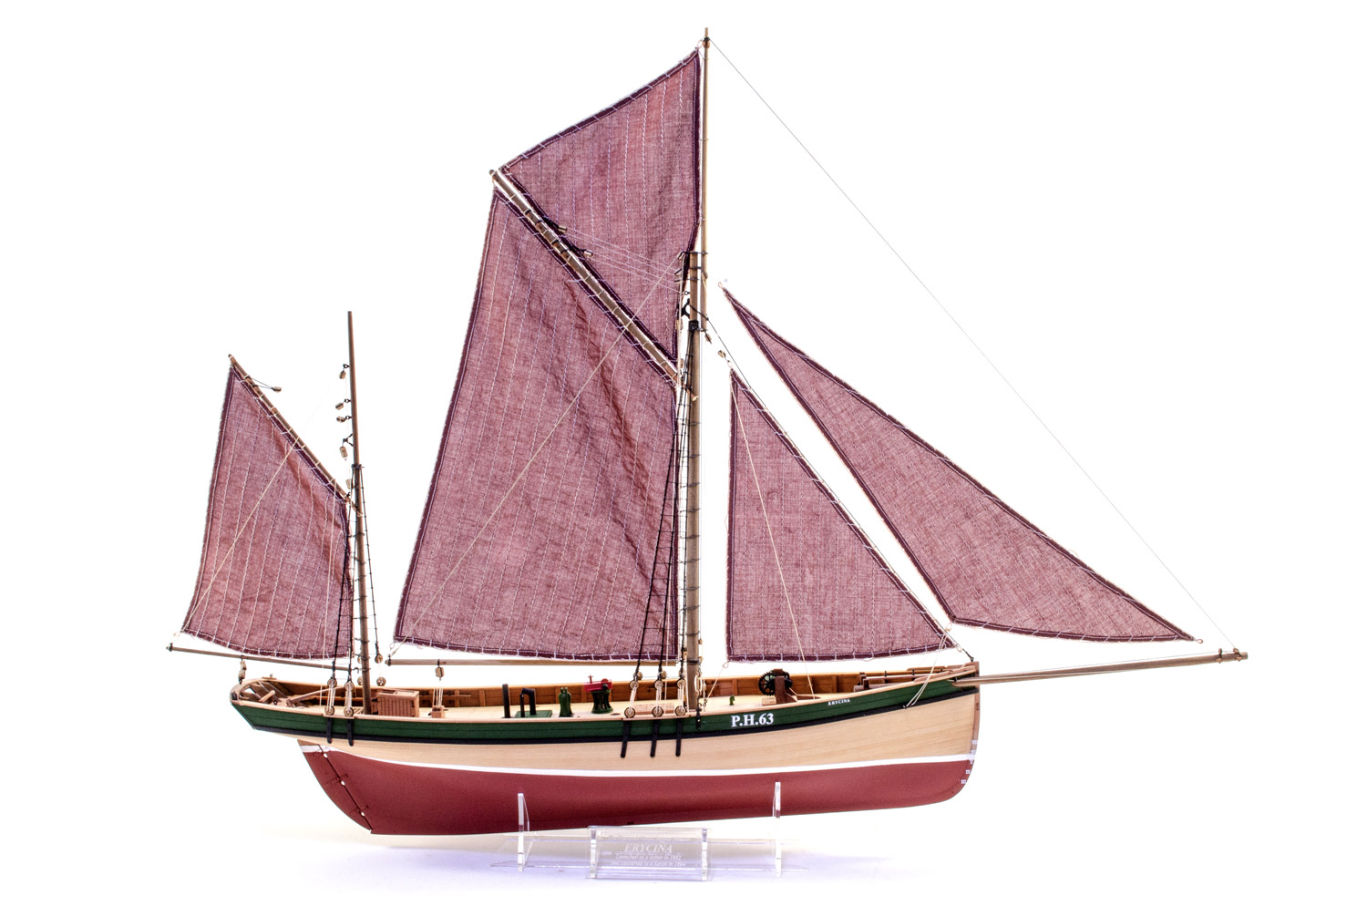 Two New Fishing Boat Kits from Vanguard Models – In Stock Now